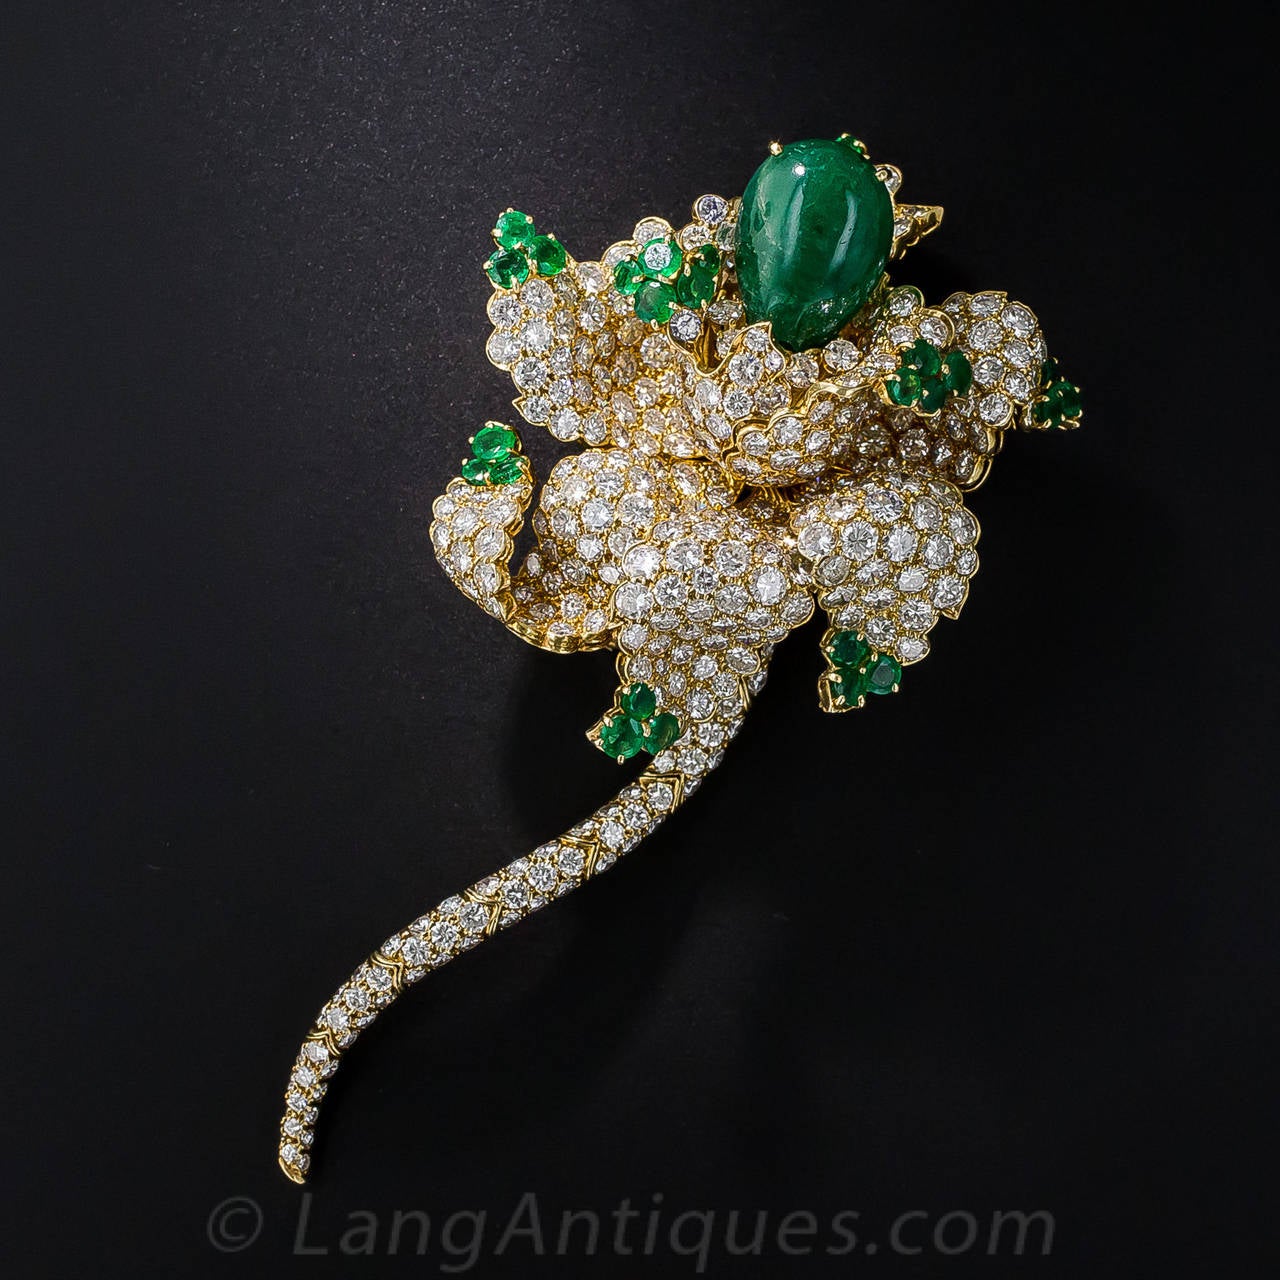 Although mysteriously unsigned, this breathtaking work of jewelry art rates among the finest latter-twentieth century pieces ever conceived or rendered by the most eminent French or American jewelery houses. The sculptural flower brooch is composed